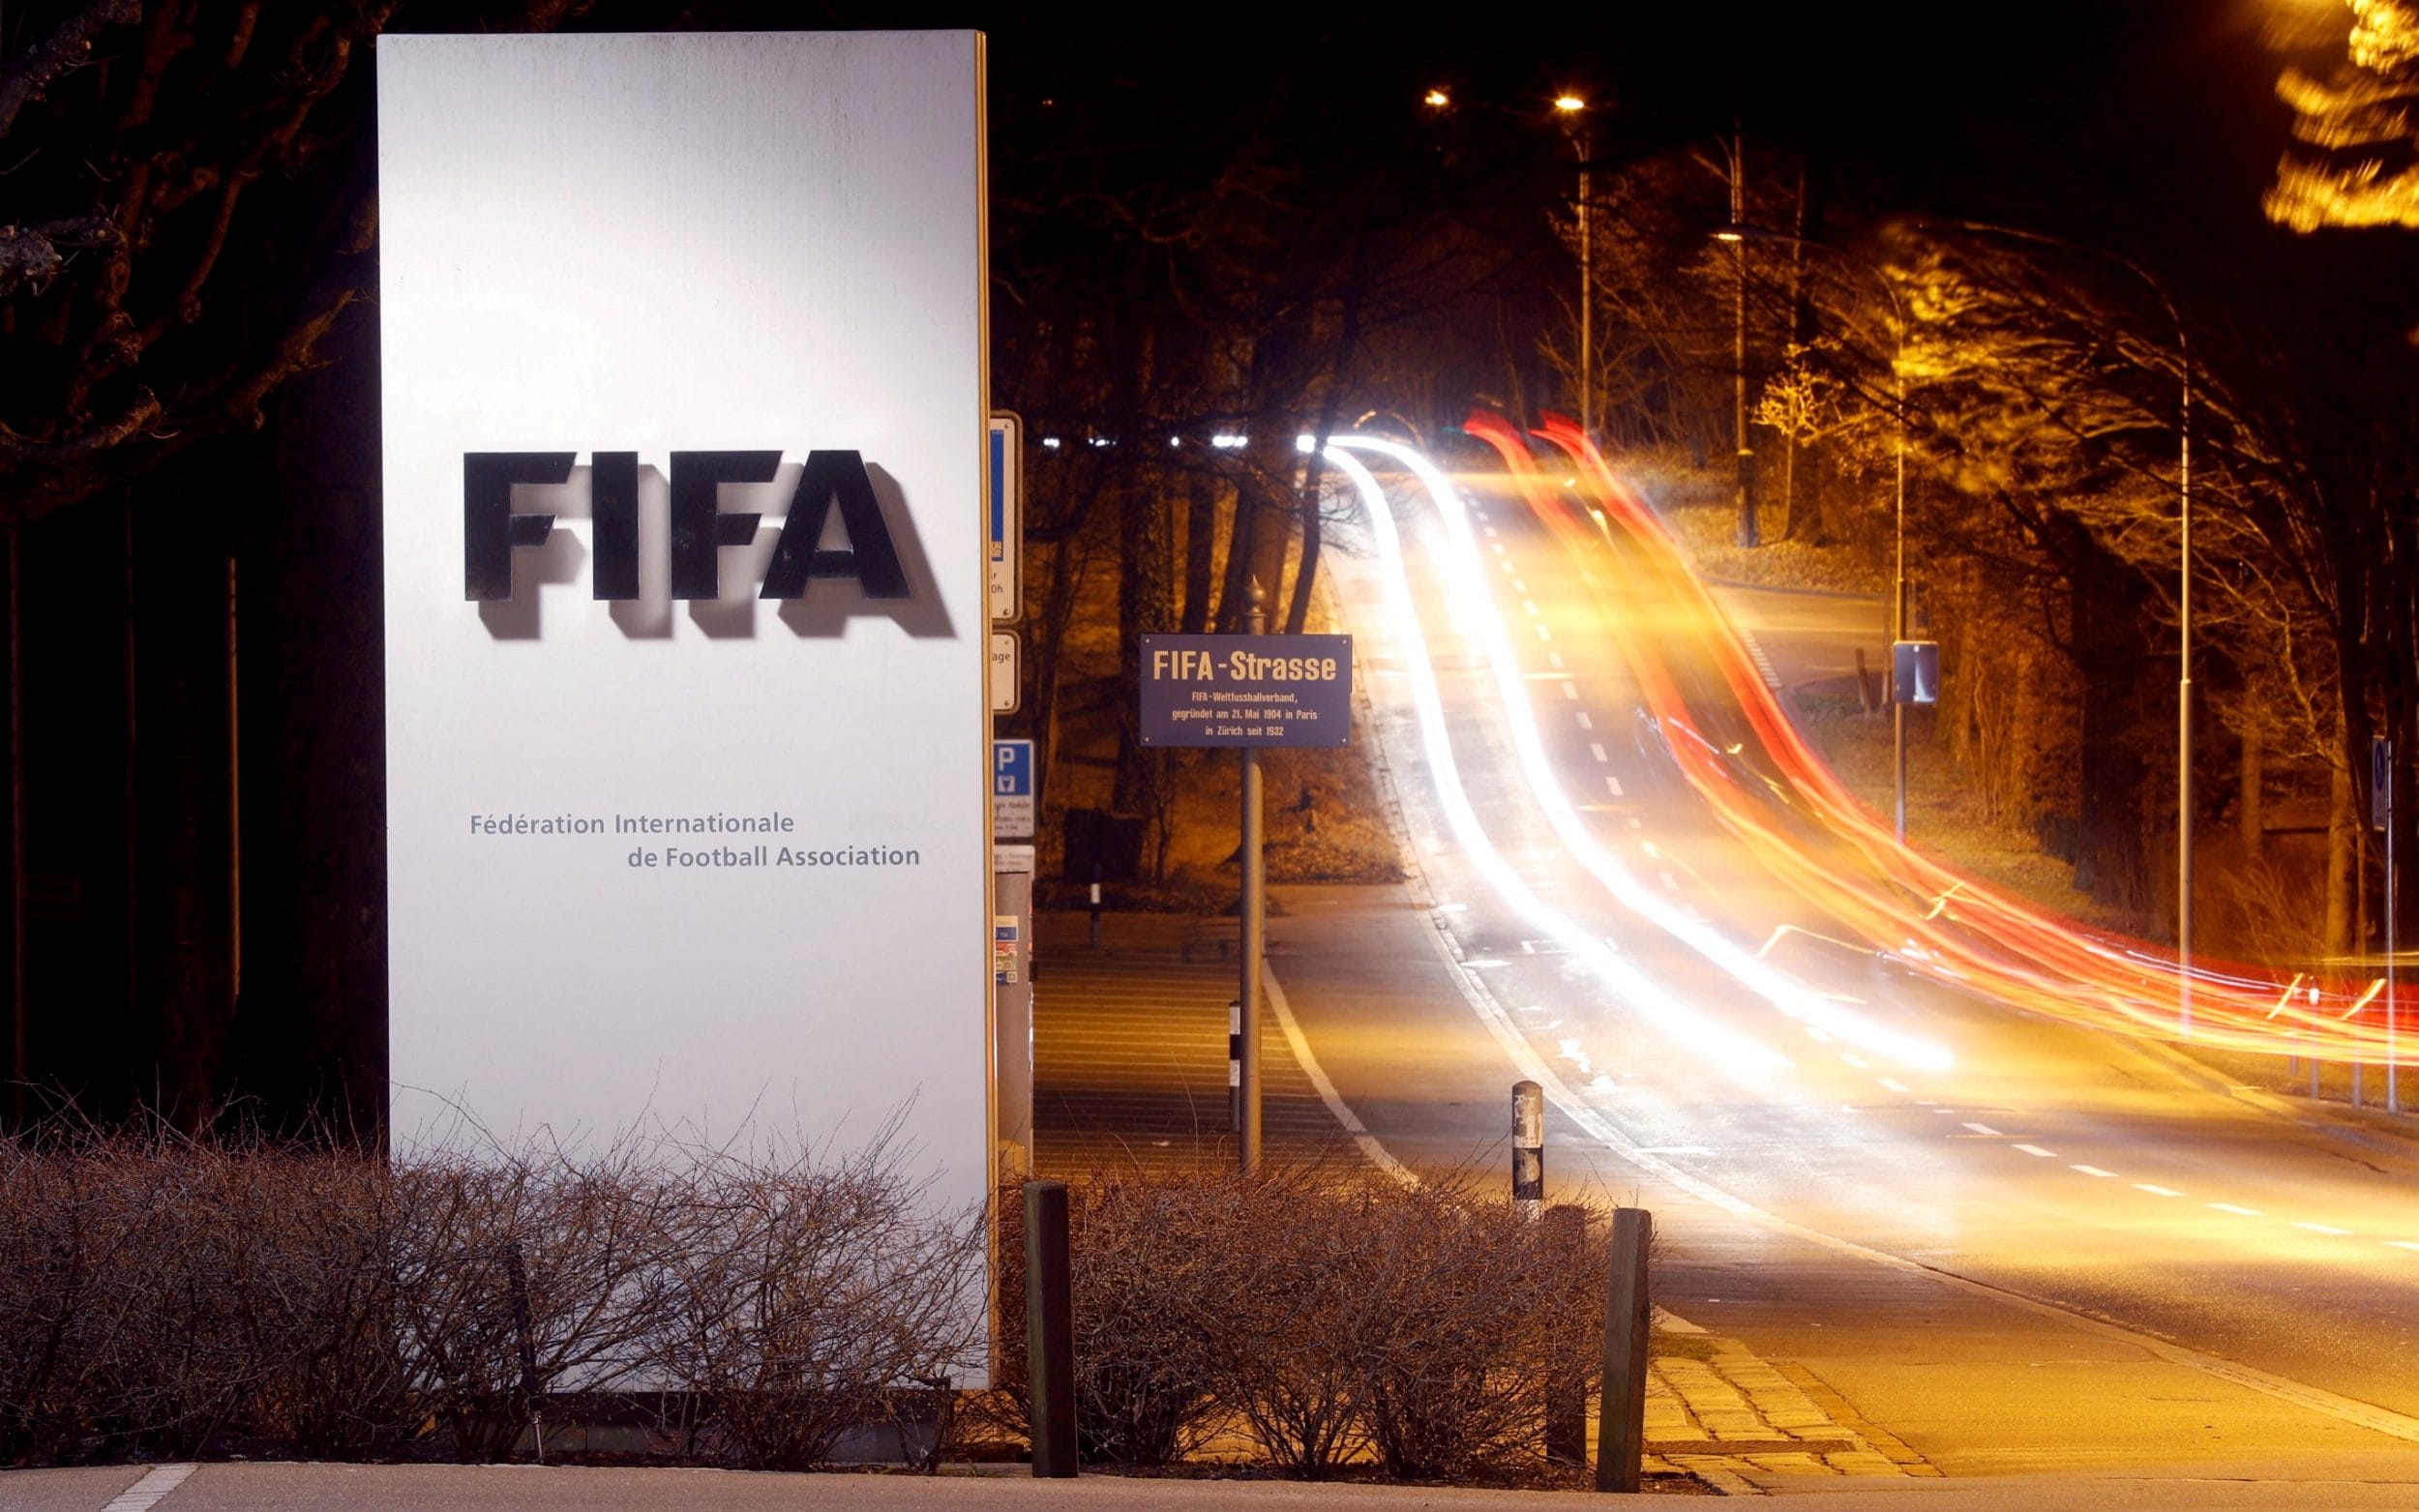 fifa face player revolt over club world cup as changes cause ‘economic harm’ to leagues